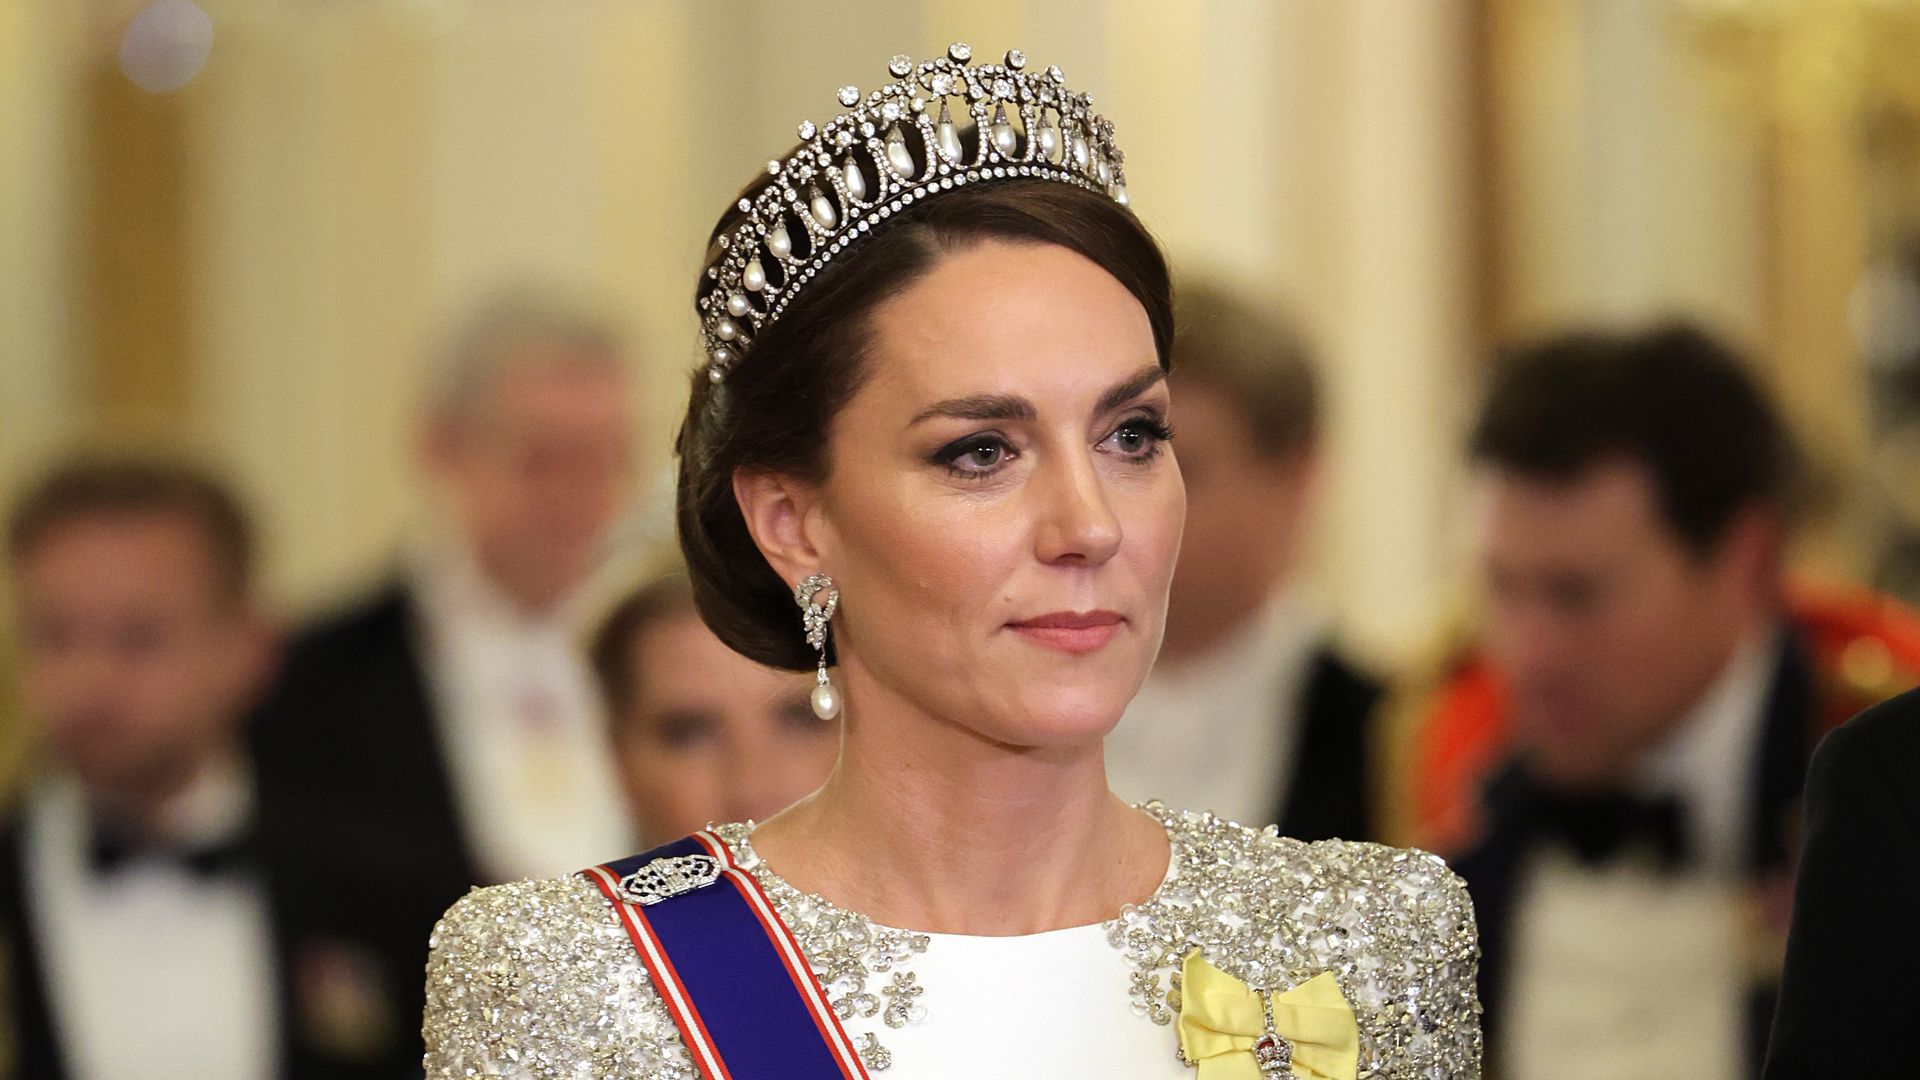 The Princess of Wales wears Lover's Knot tiara to South Africa state banquet